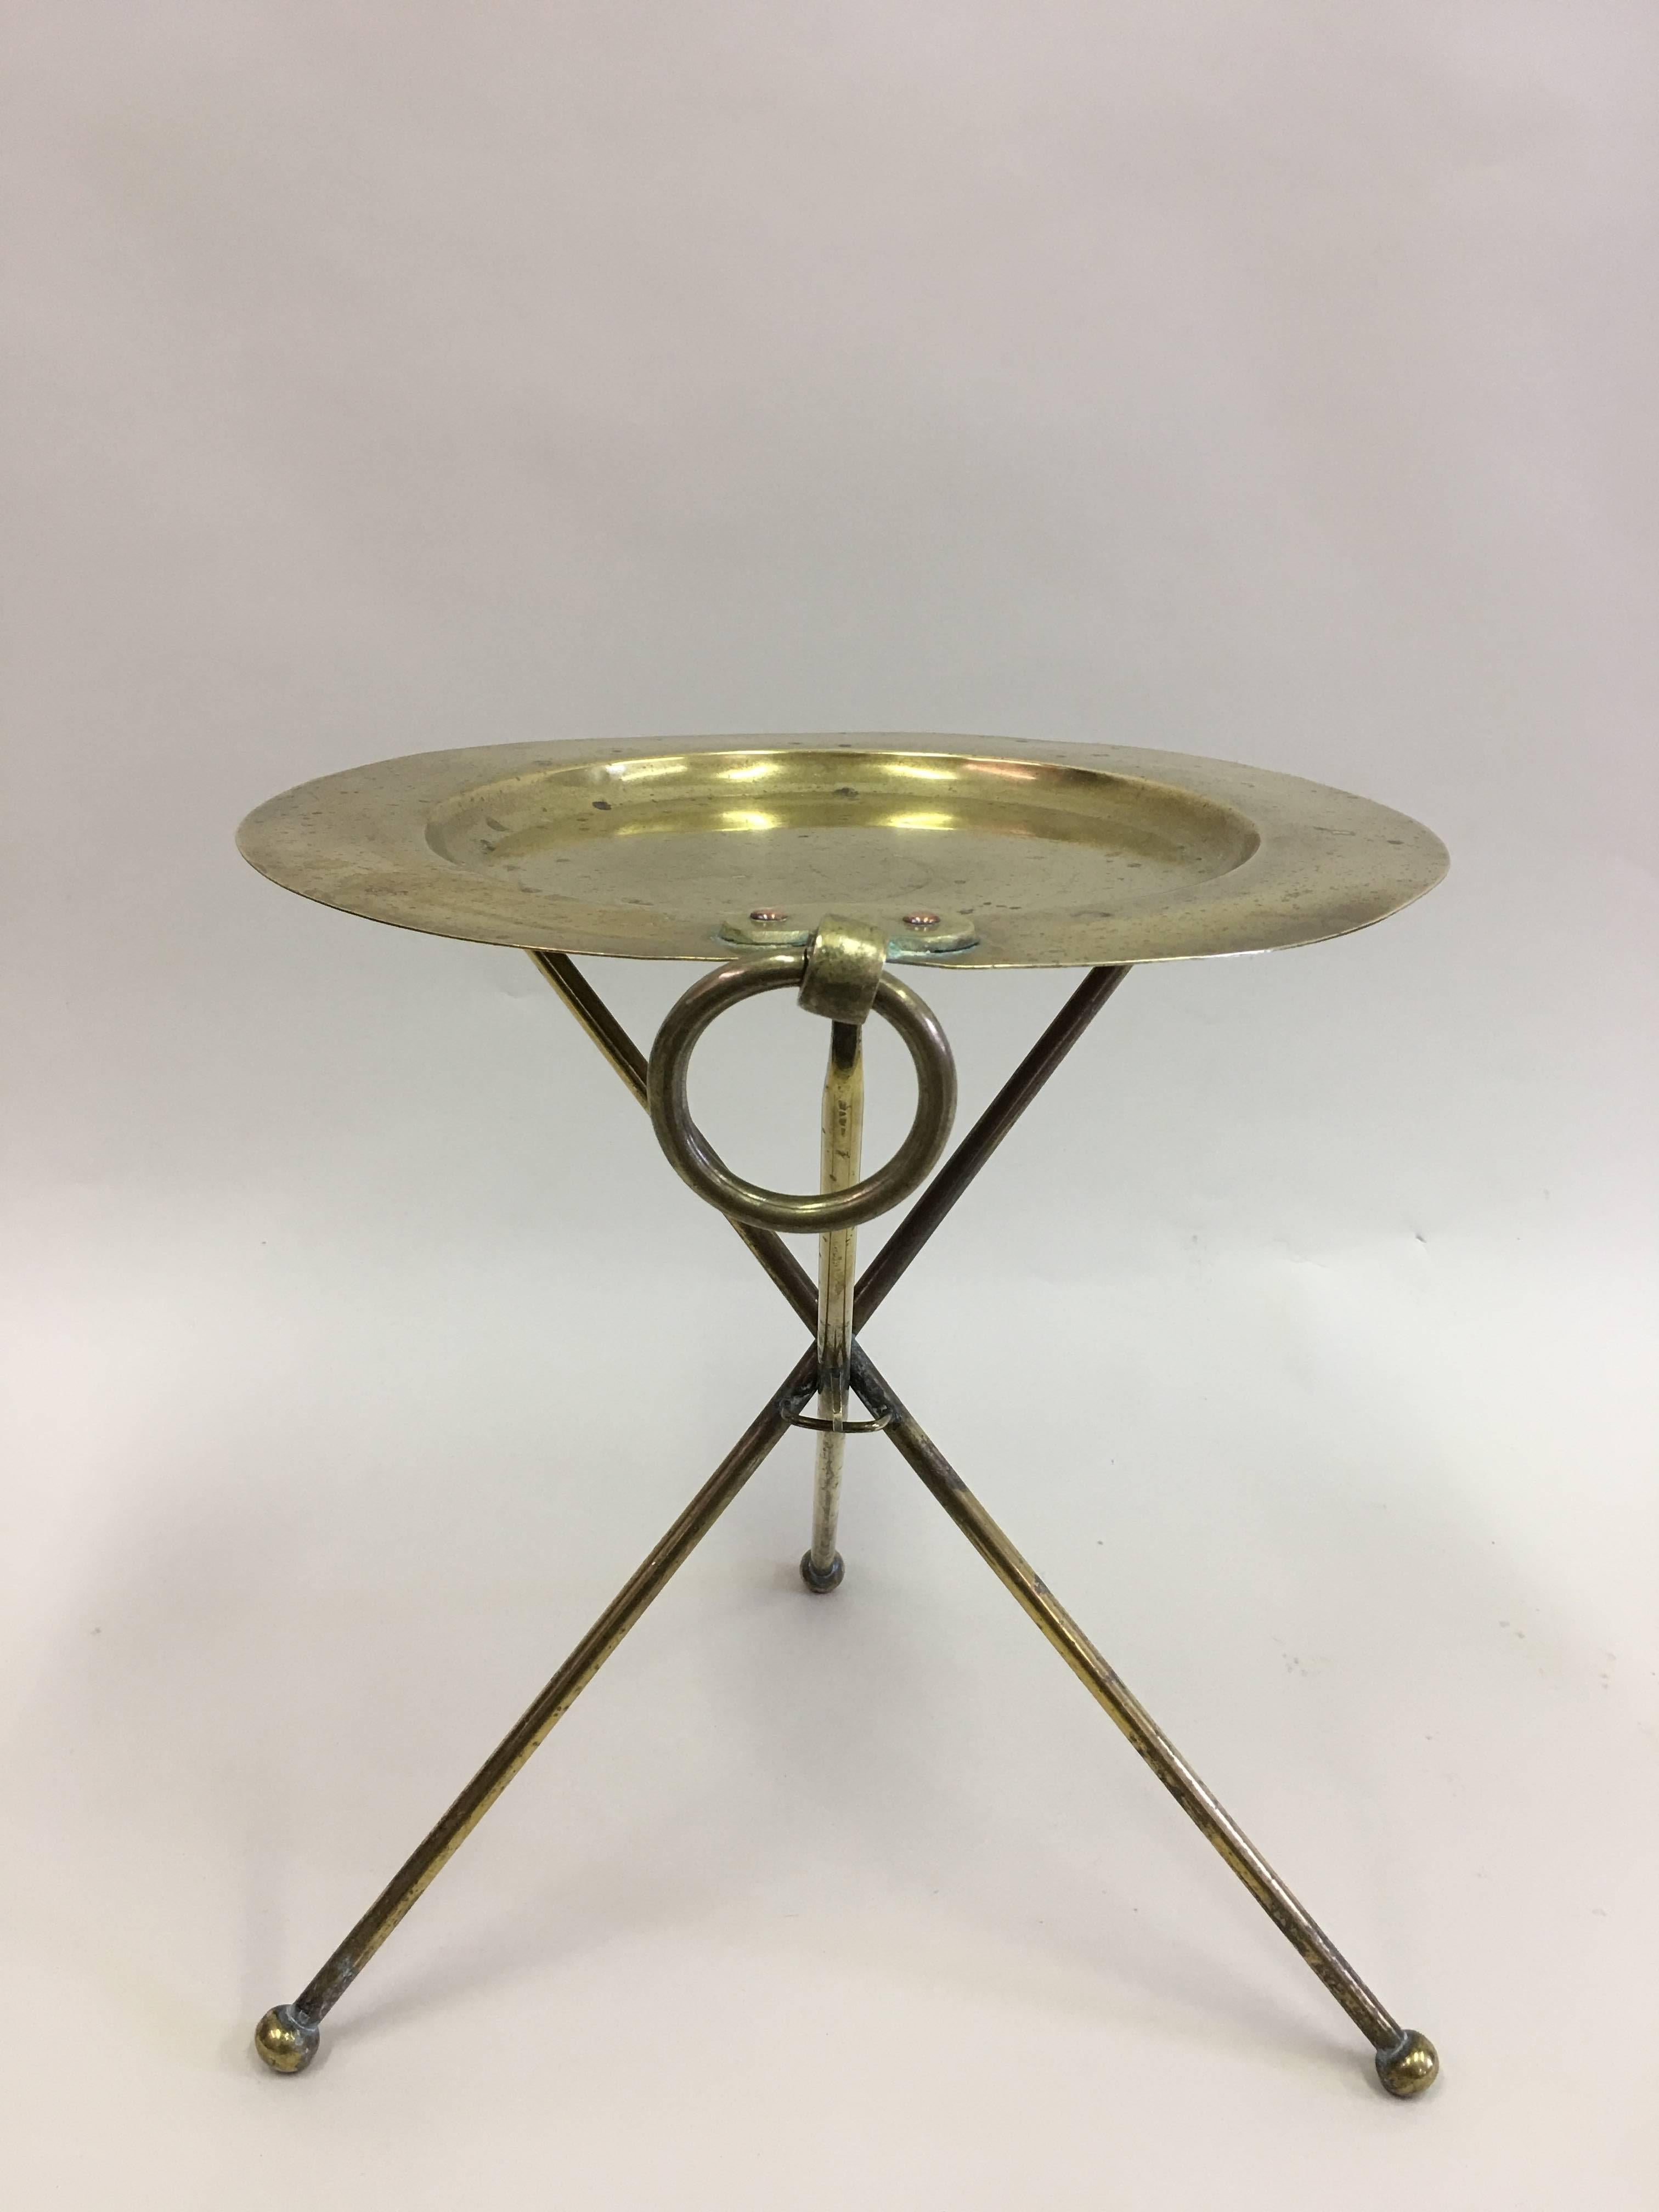 Elegant French Mid-Century solid brass guéridon, side, end or occasional table in the modern neoclassical tradition. 

The solid brass table sits on a tripod base with ball feet and supports a round top. A ring pull adorns the piece on one side.